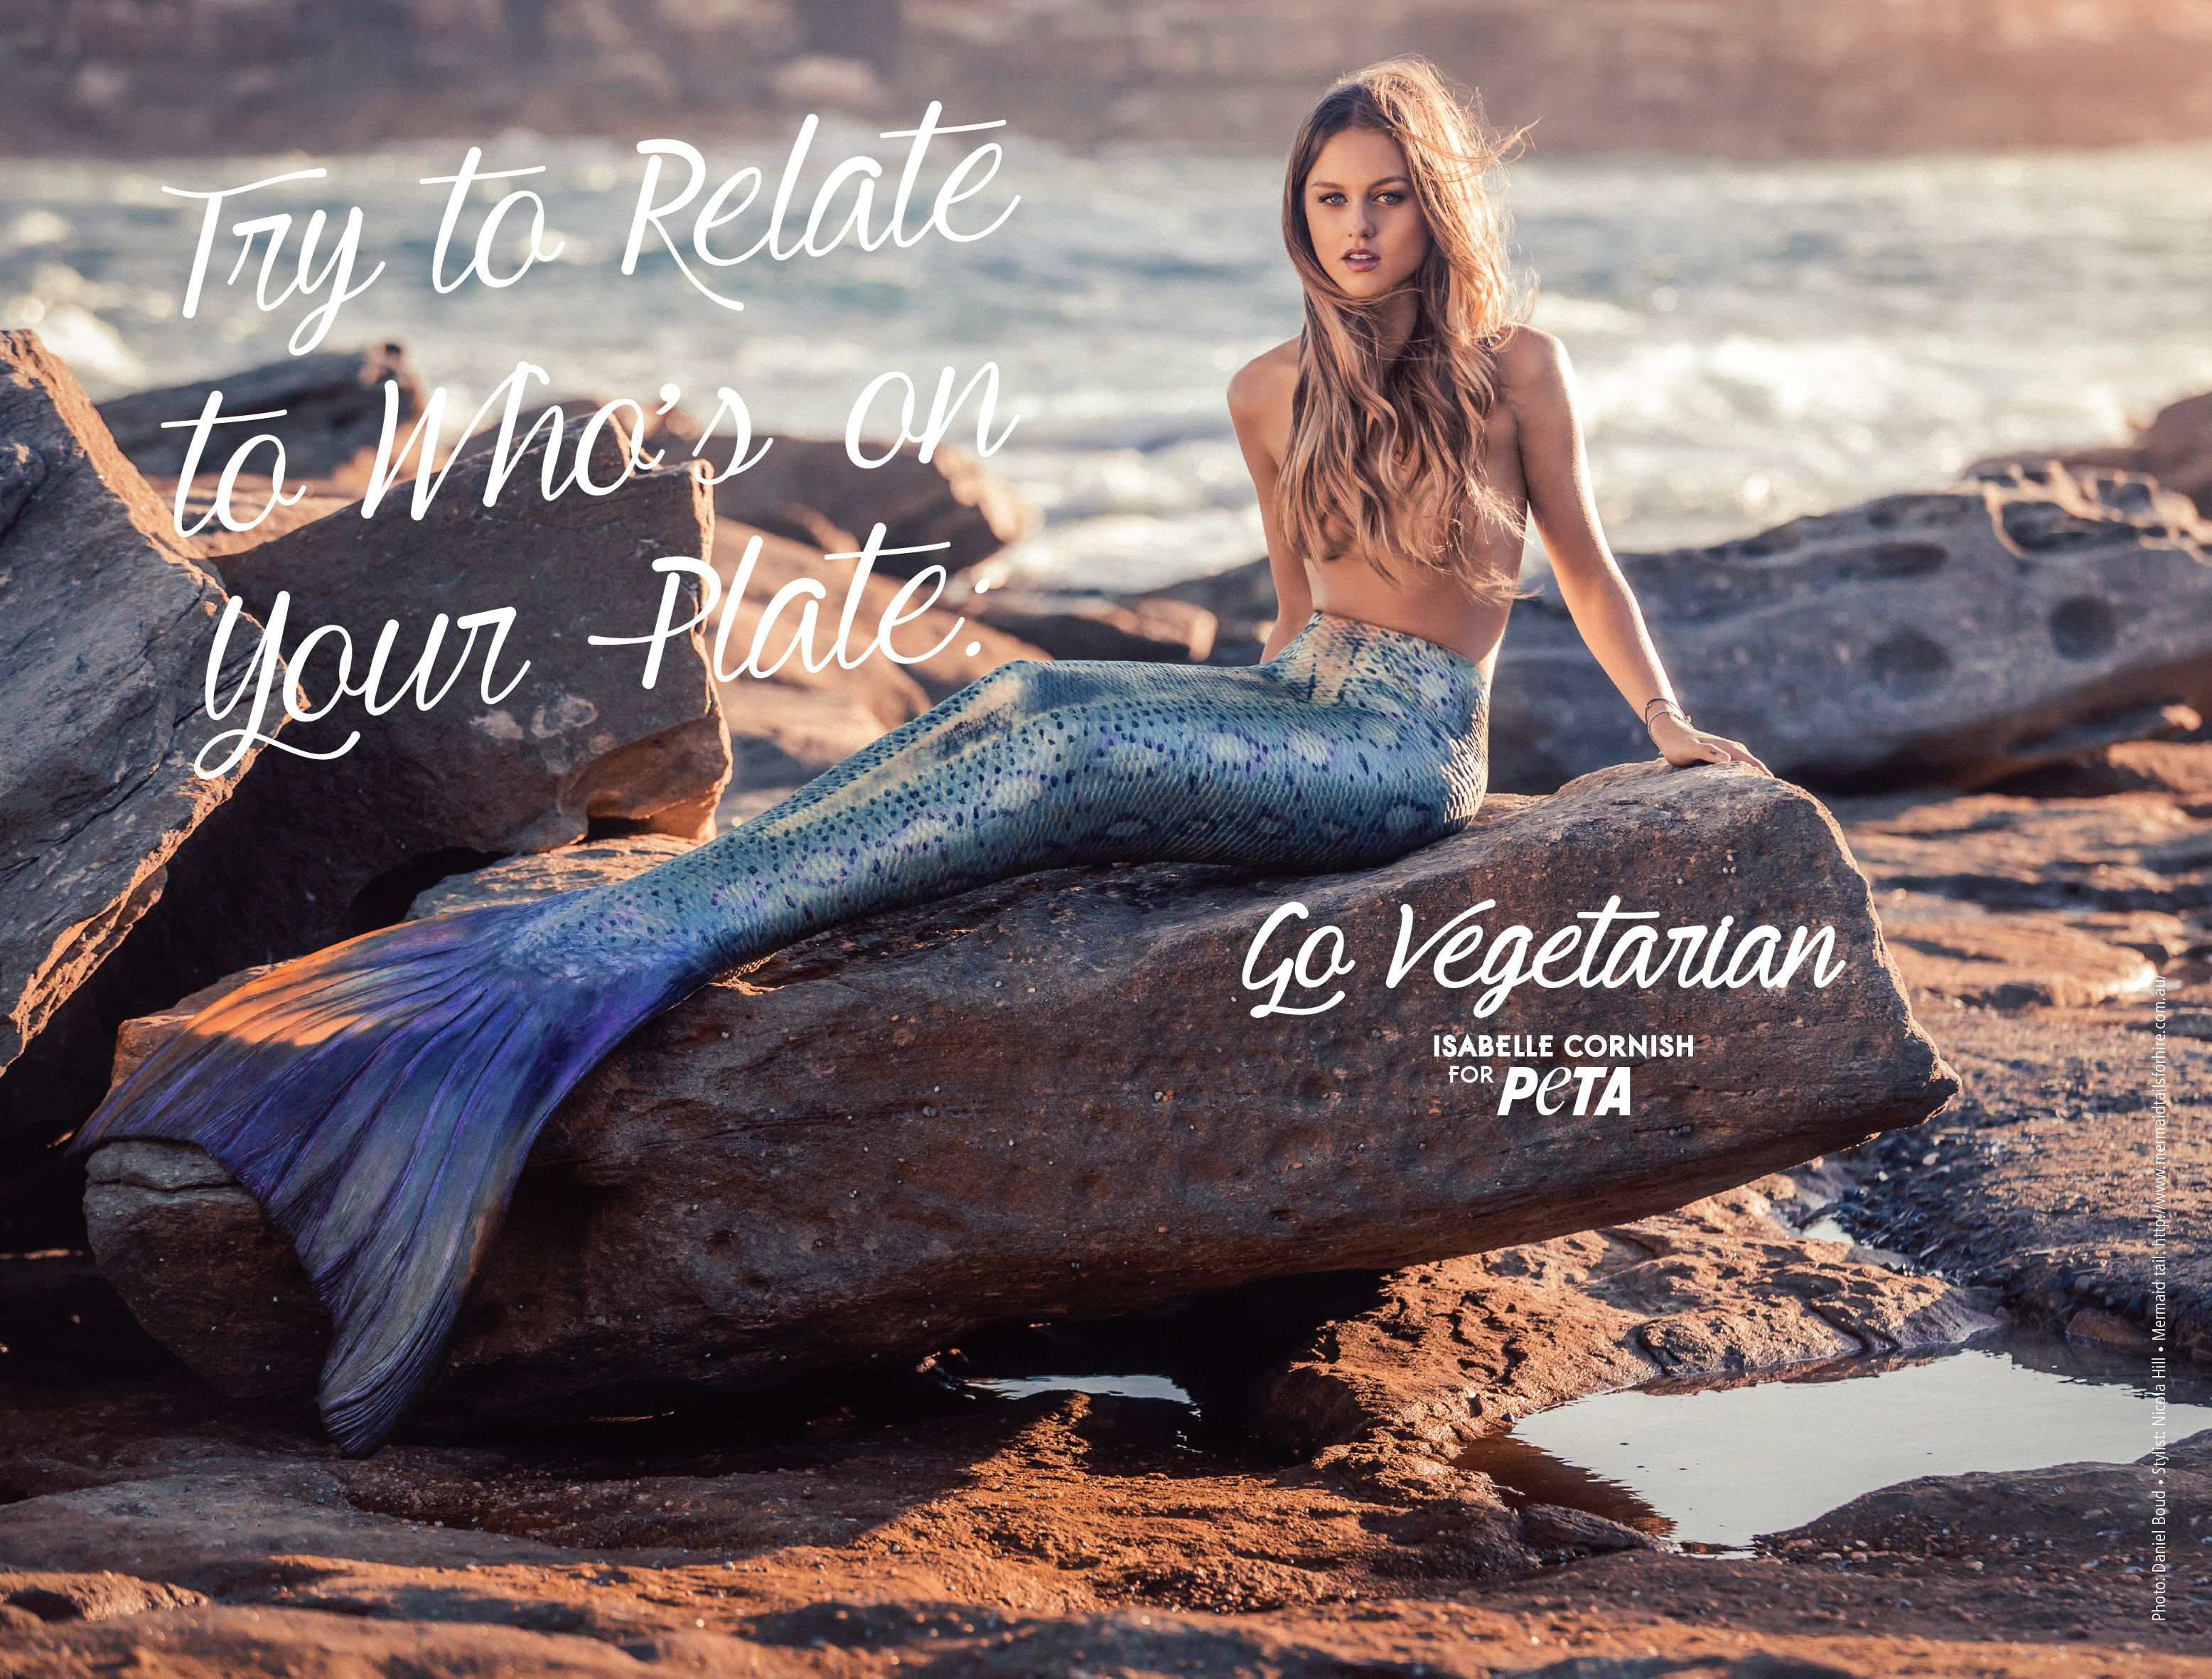 Isabelle Cornish Channels Her Inner Mermaid in New PETA Ad